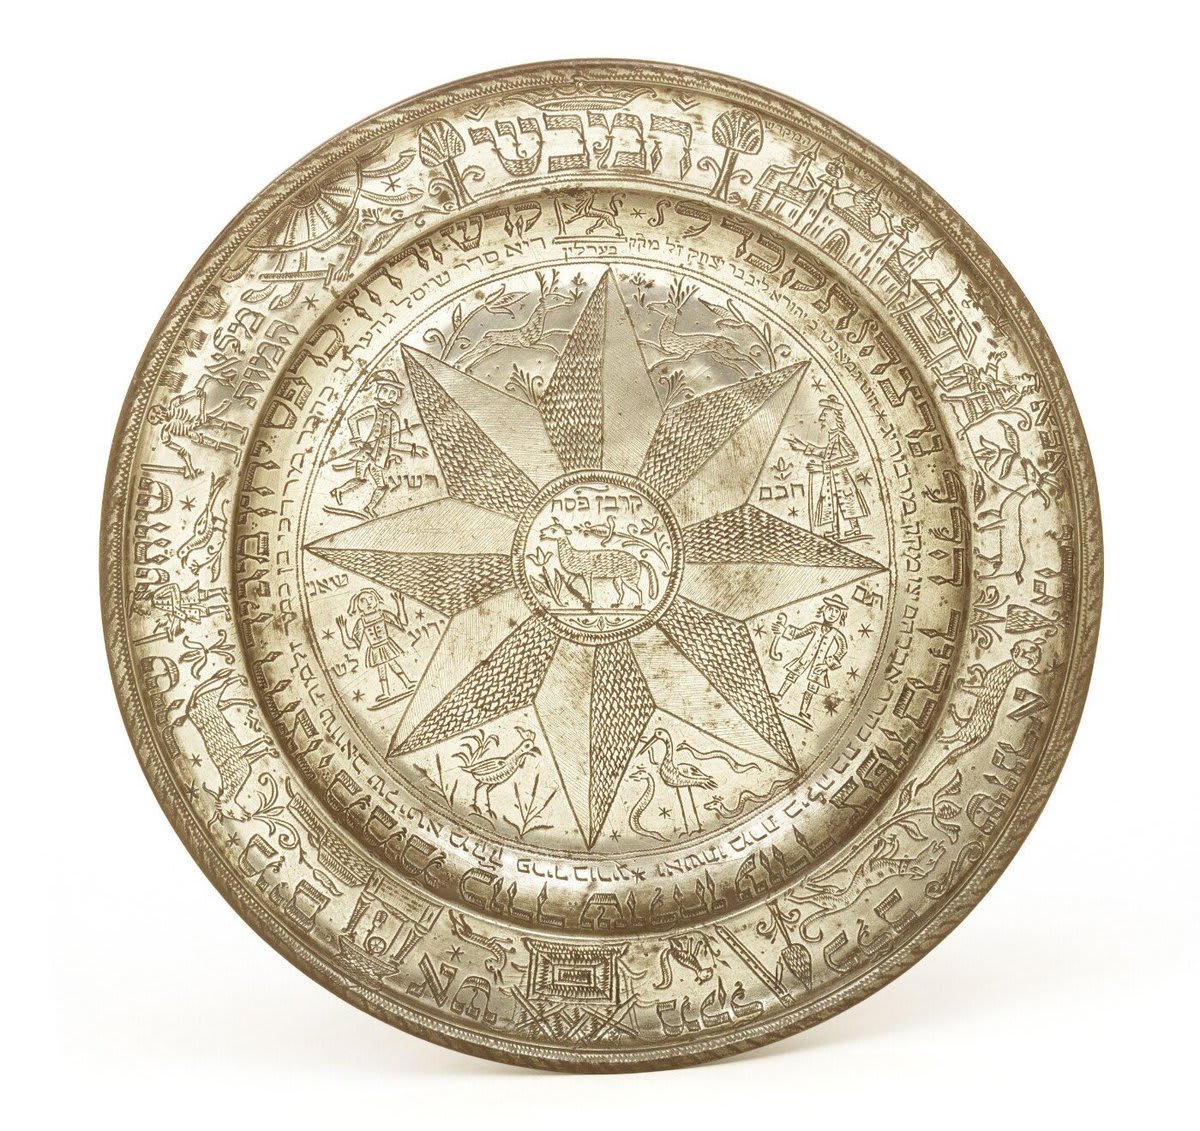 Happy Passover! This Seder plate, traditionally used on the first two nights of Passover, was designed to hold the six symbolic foods eaten during the Passover meal.